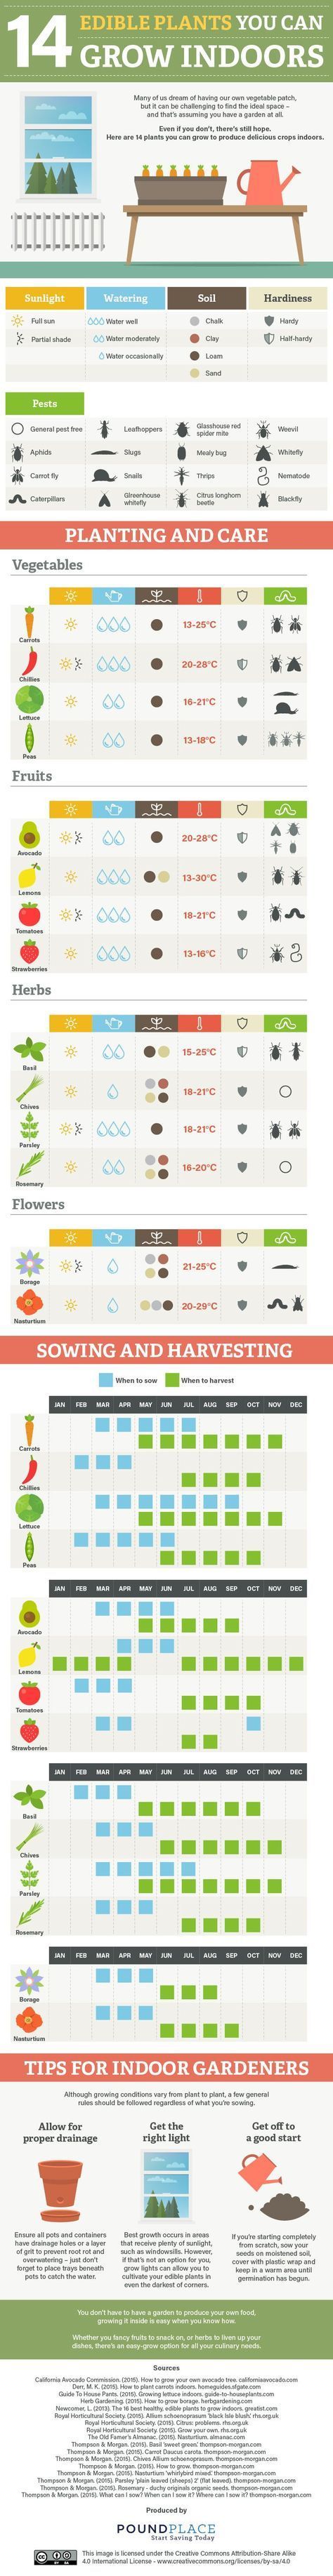 These are the fruits, vegetables, herbs, and flowers your indoor garden needs.